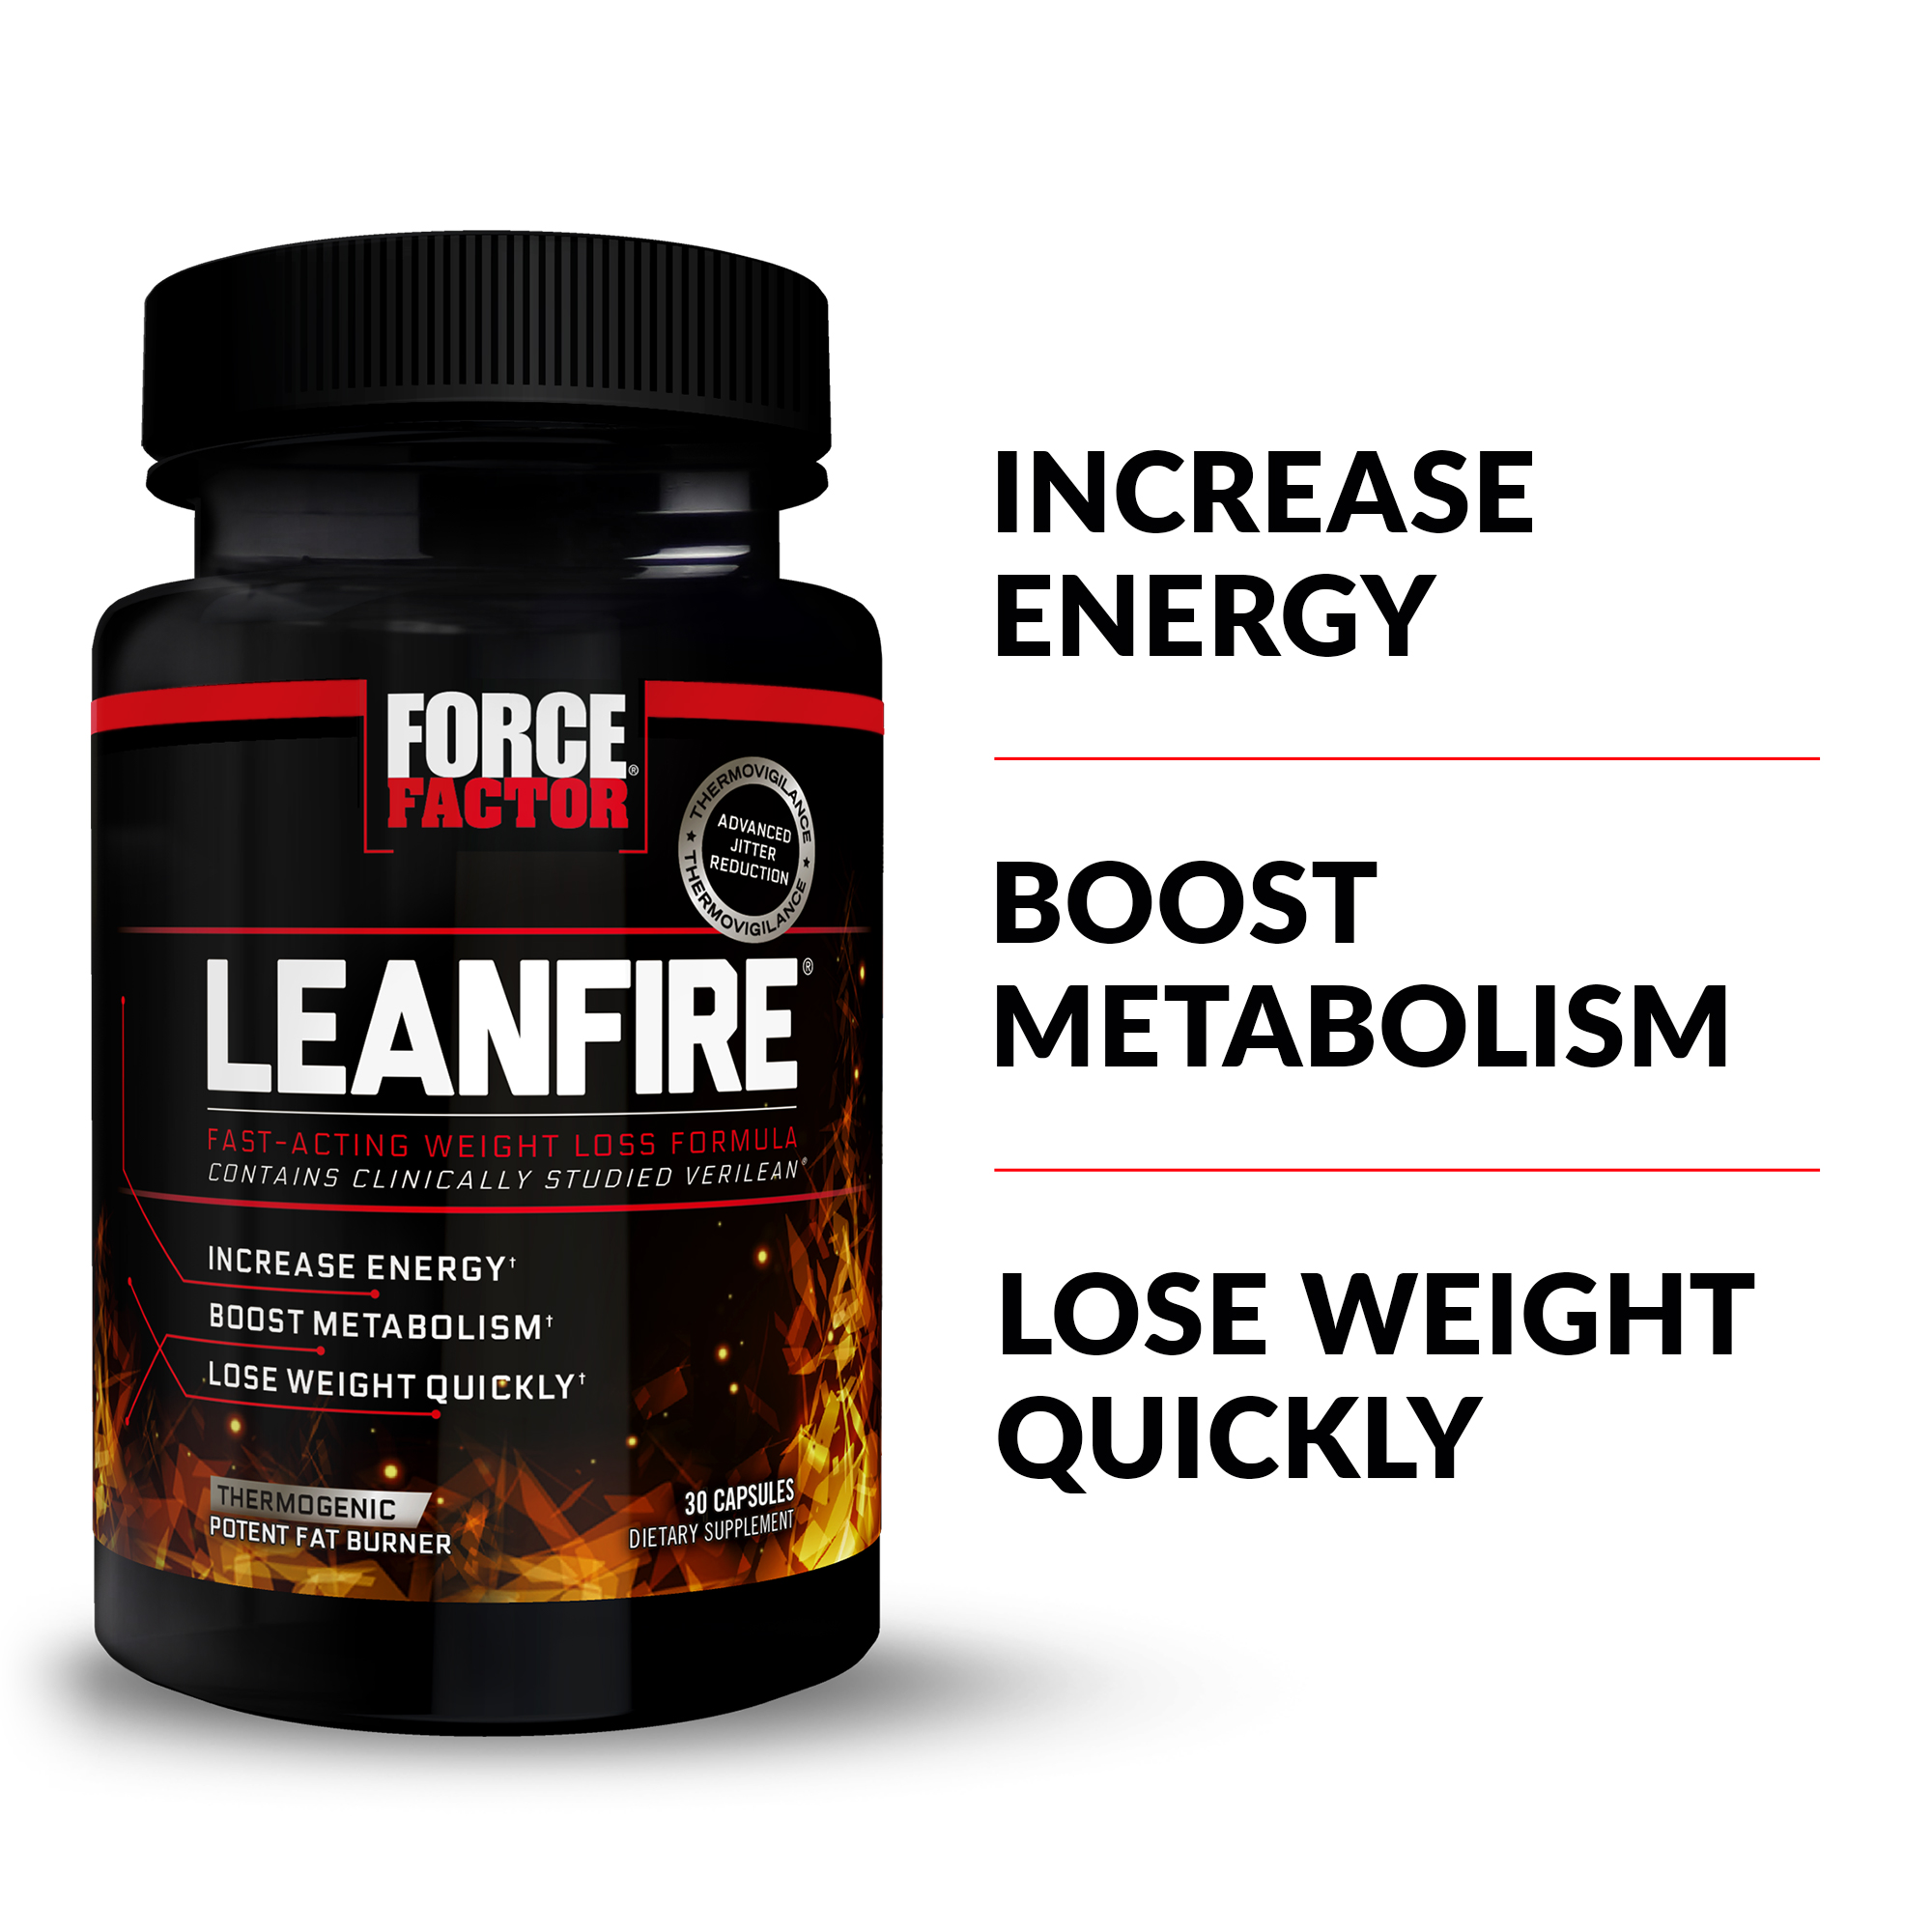 Force Factor LeanFire Weight Loss & Appetite Control Supplement with Green Coffee Bean, 30 Capsules - image 2 of 10